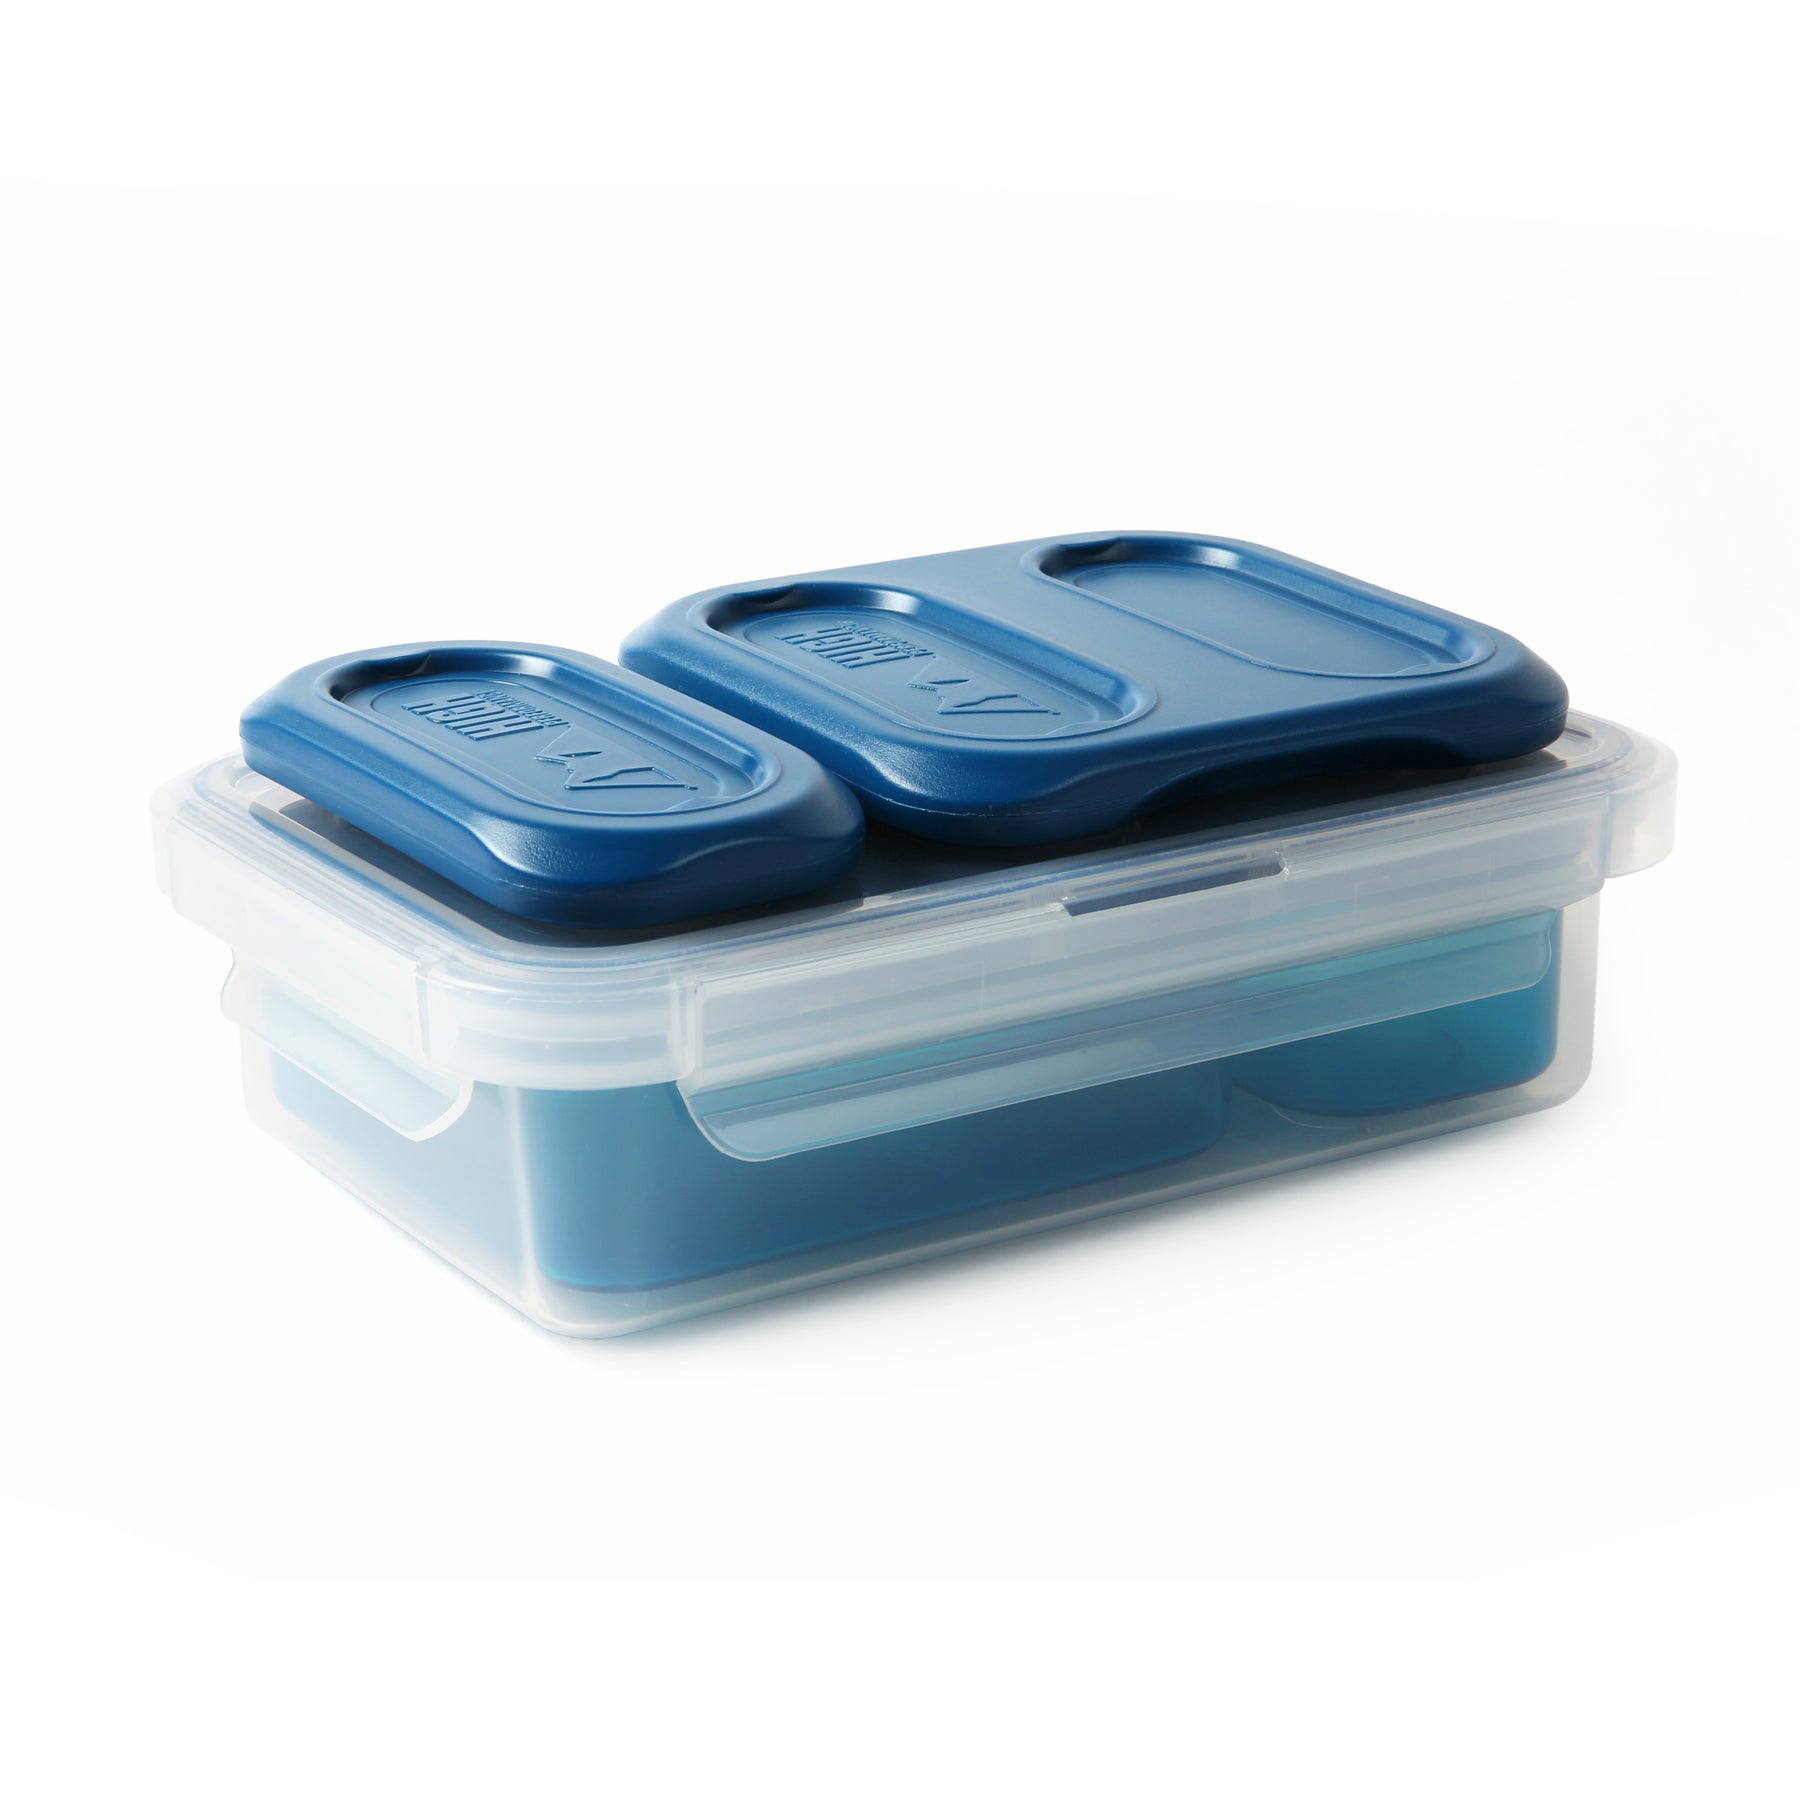 Rubbermaid Ice Cube Tray Top Rack Dishwasher Safe Set 2 Ct (Pack